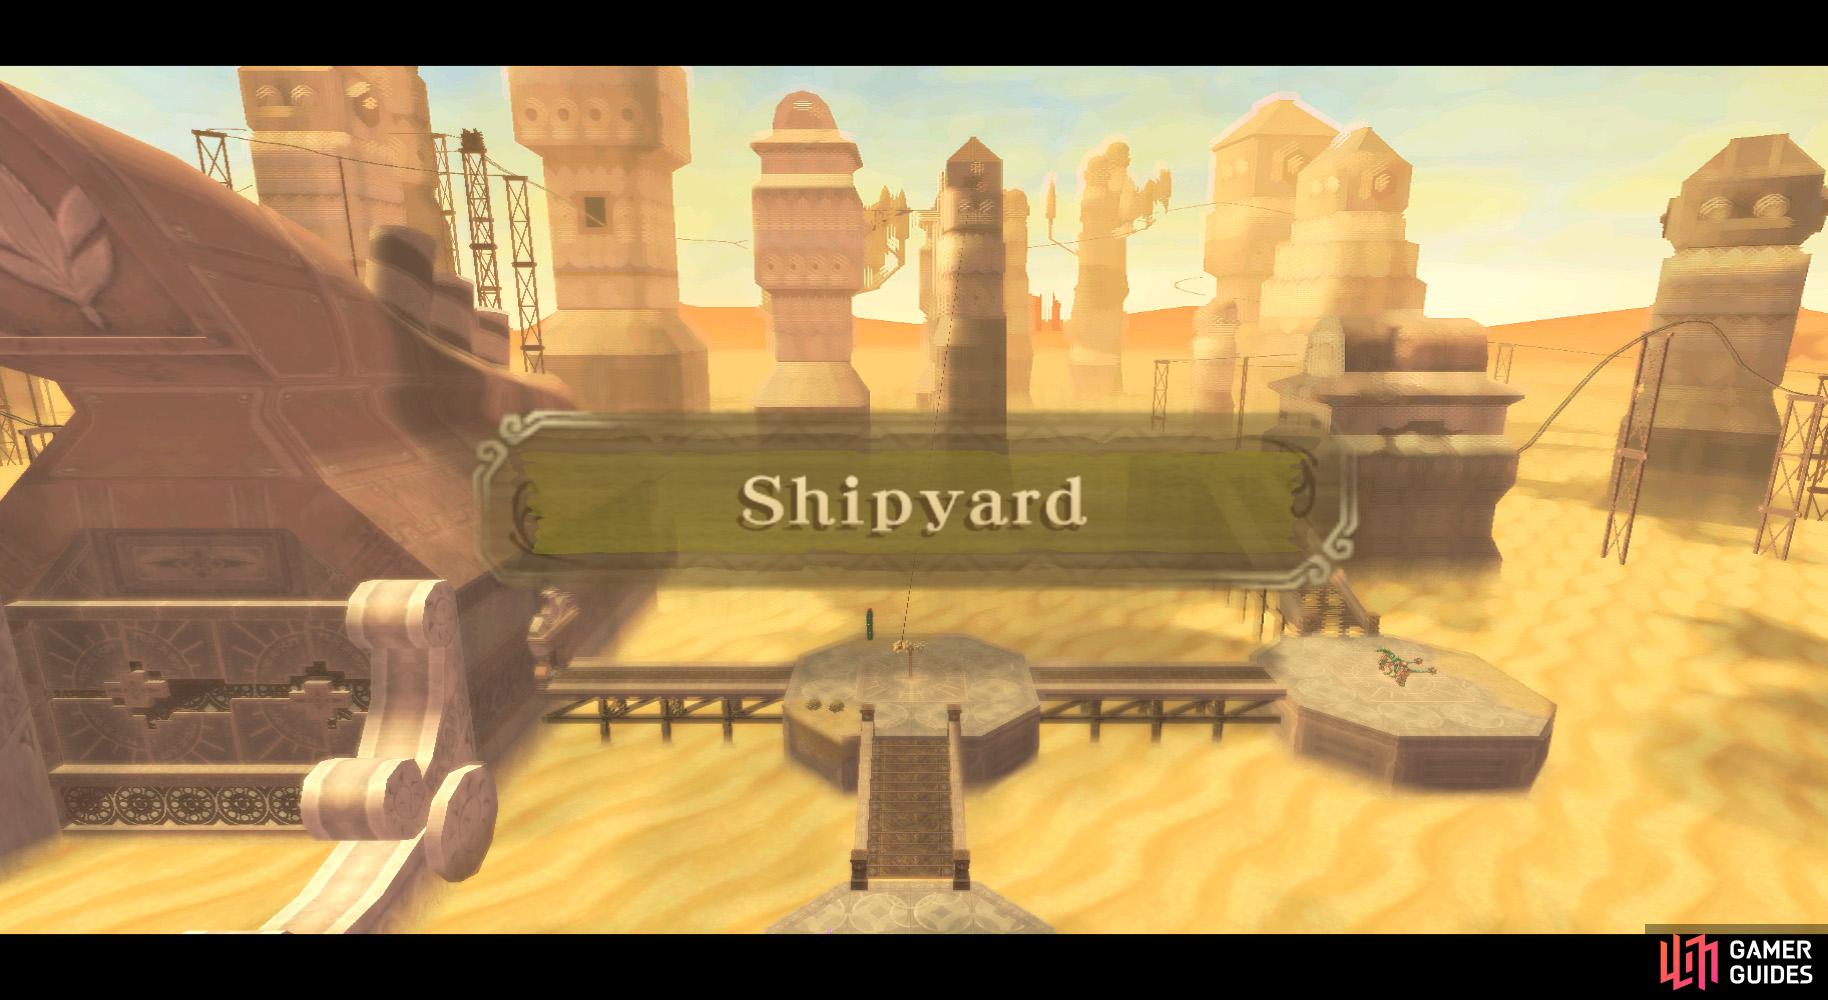 The Shipyard probably isnt what you expect…